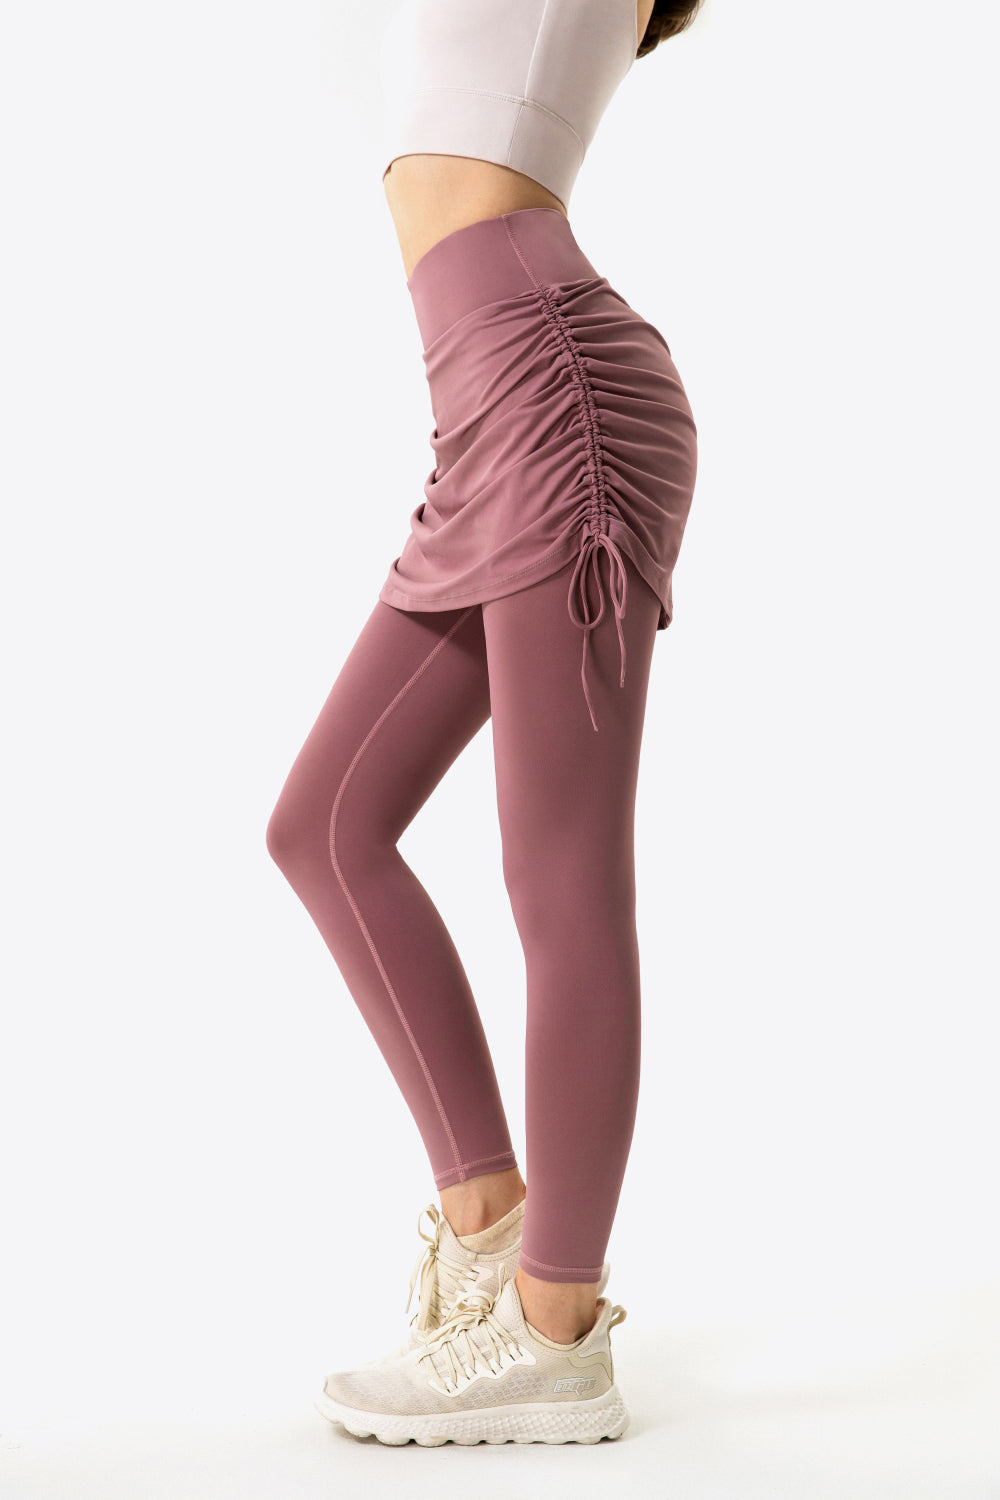 Ruched Yoga Skirt to Create Skirted Yoga Pants- Ready to Ship in a Variety  of Sizes and Colors! - Kobieta Clothing Company